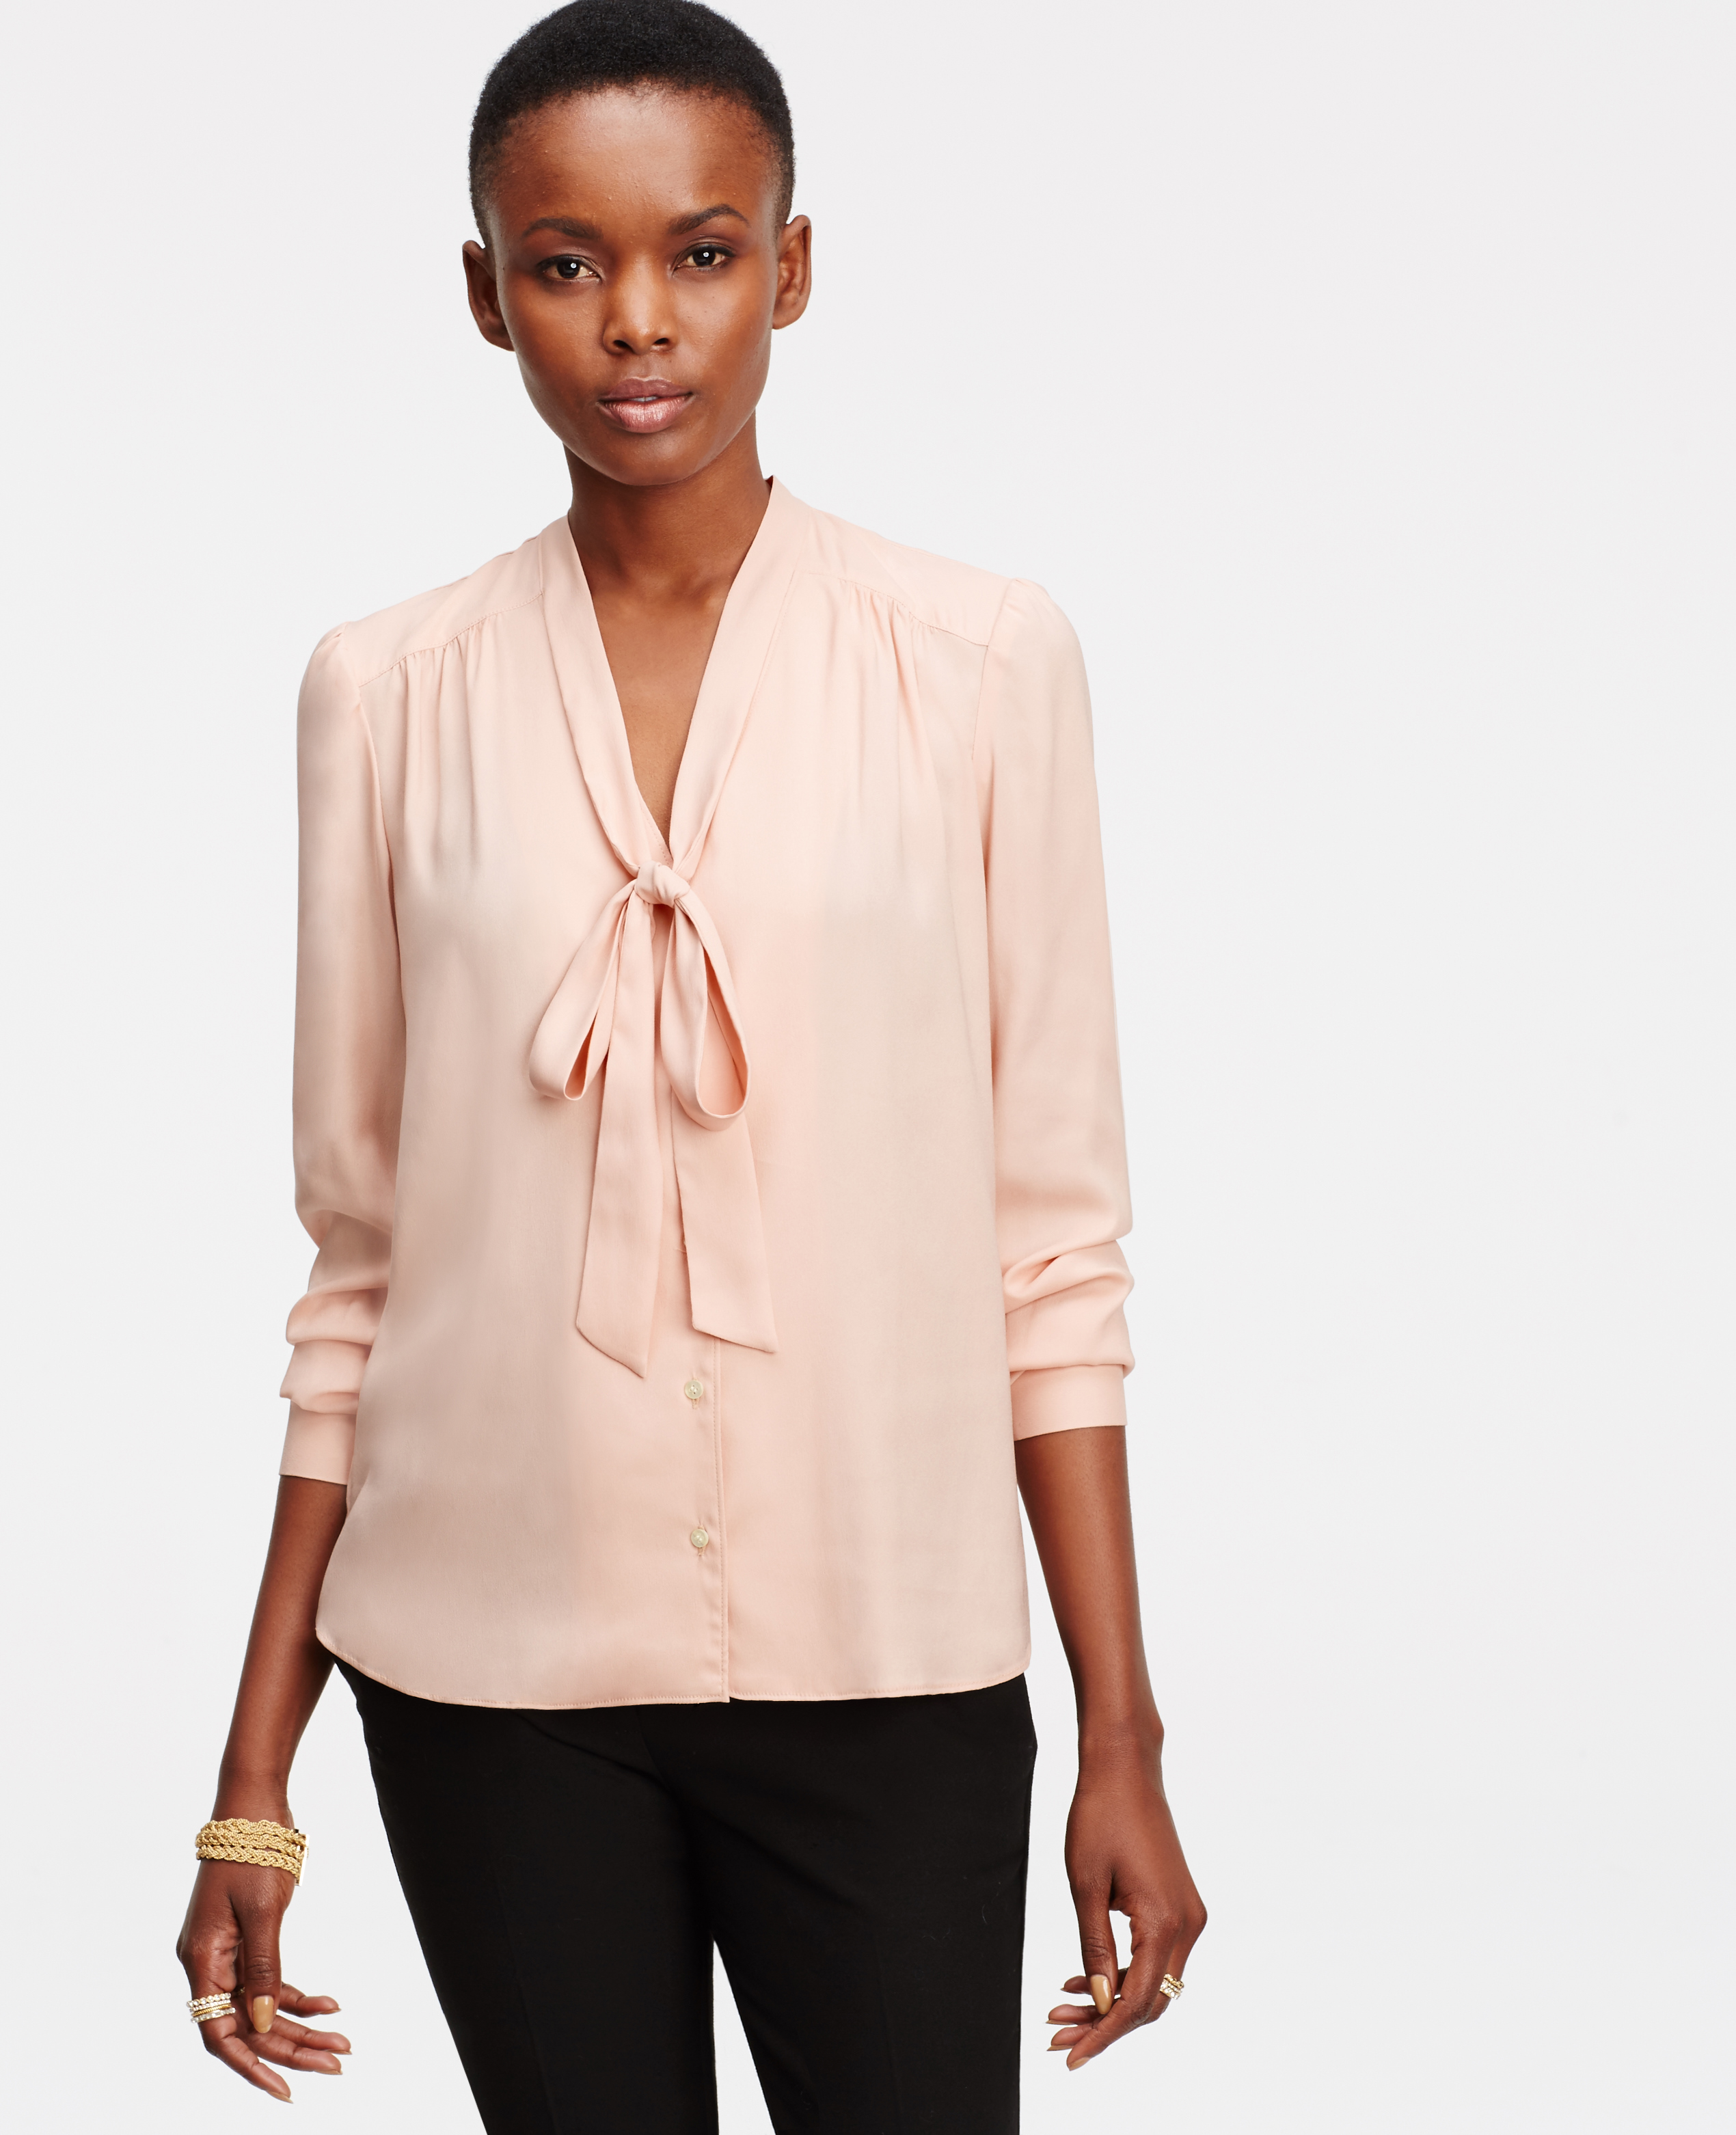 Lyst - Ann Taylor Petite Tie Neck Blouse in Pink